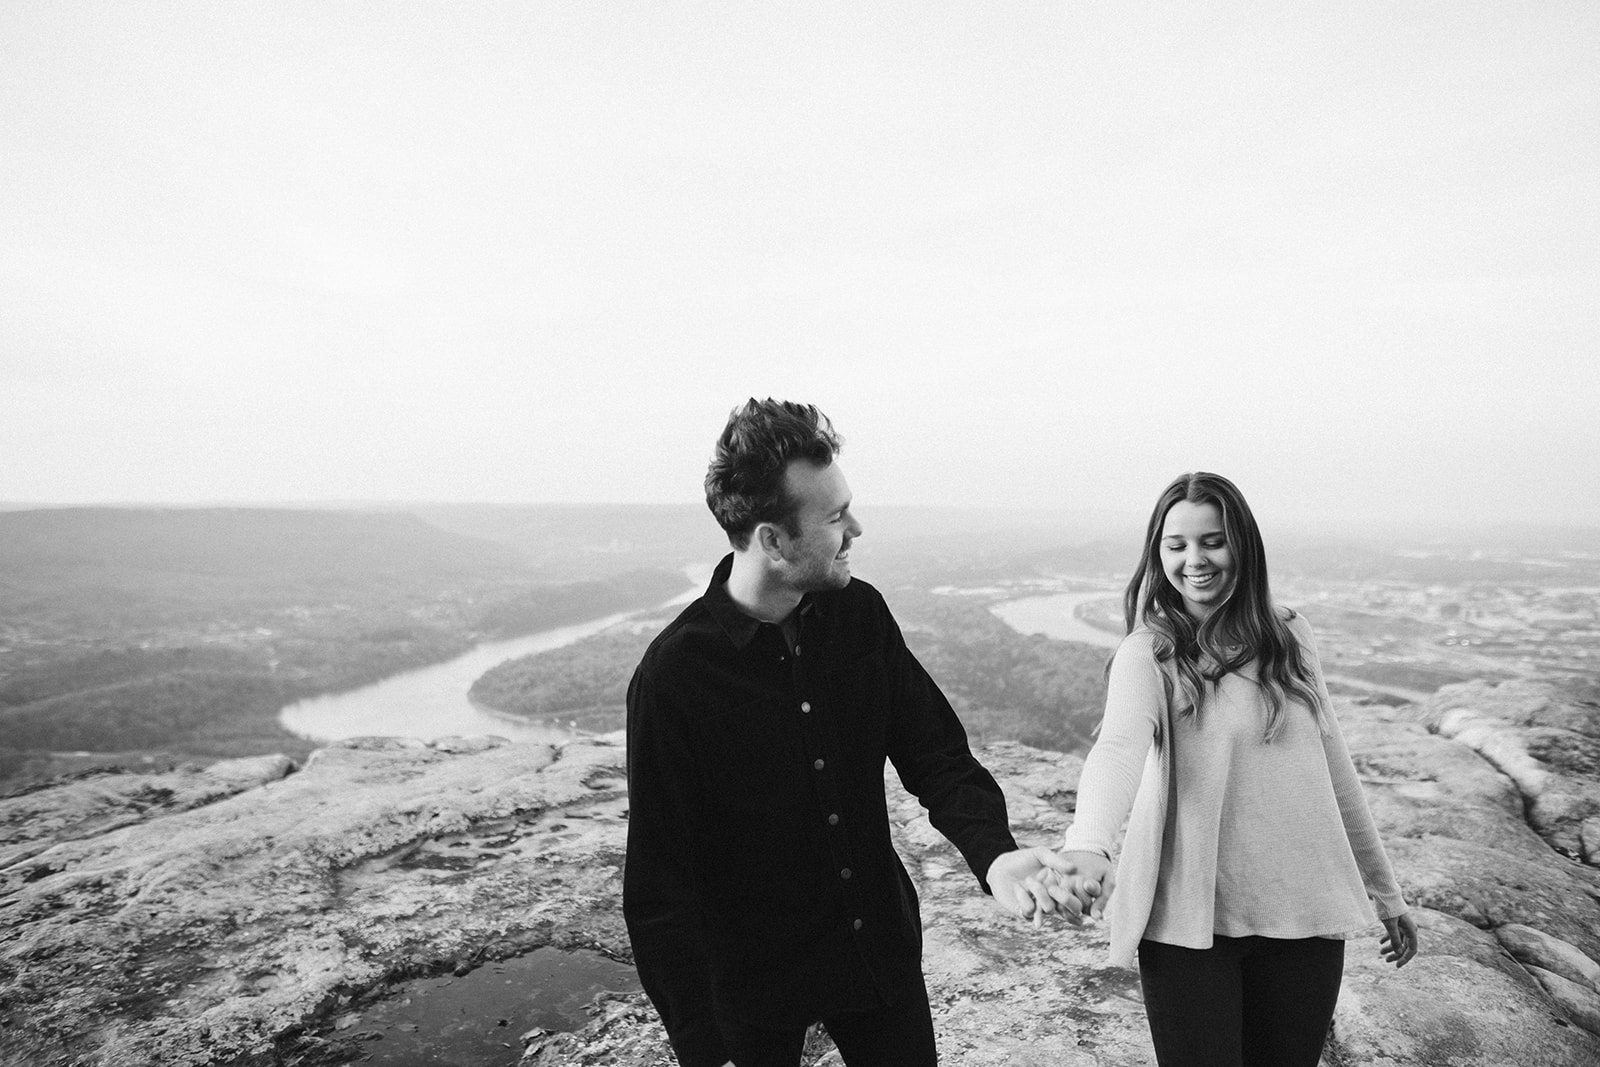 Couple embrace during their engagement photo session looking over downtown Chattanooga.